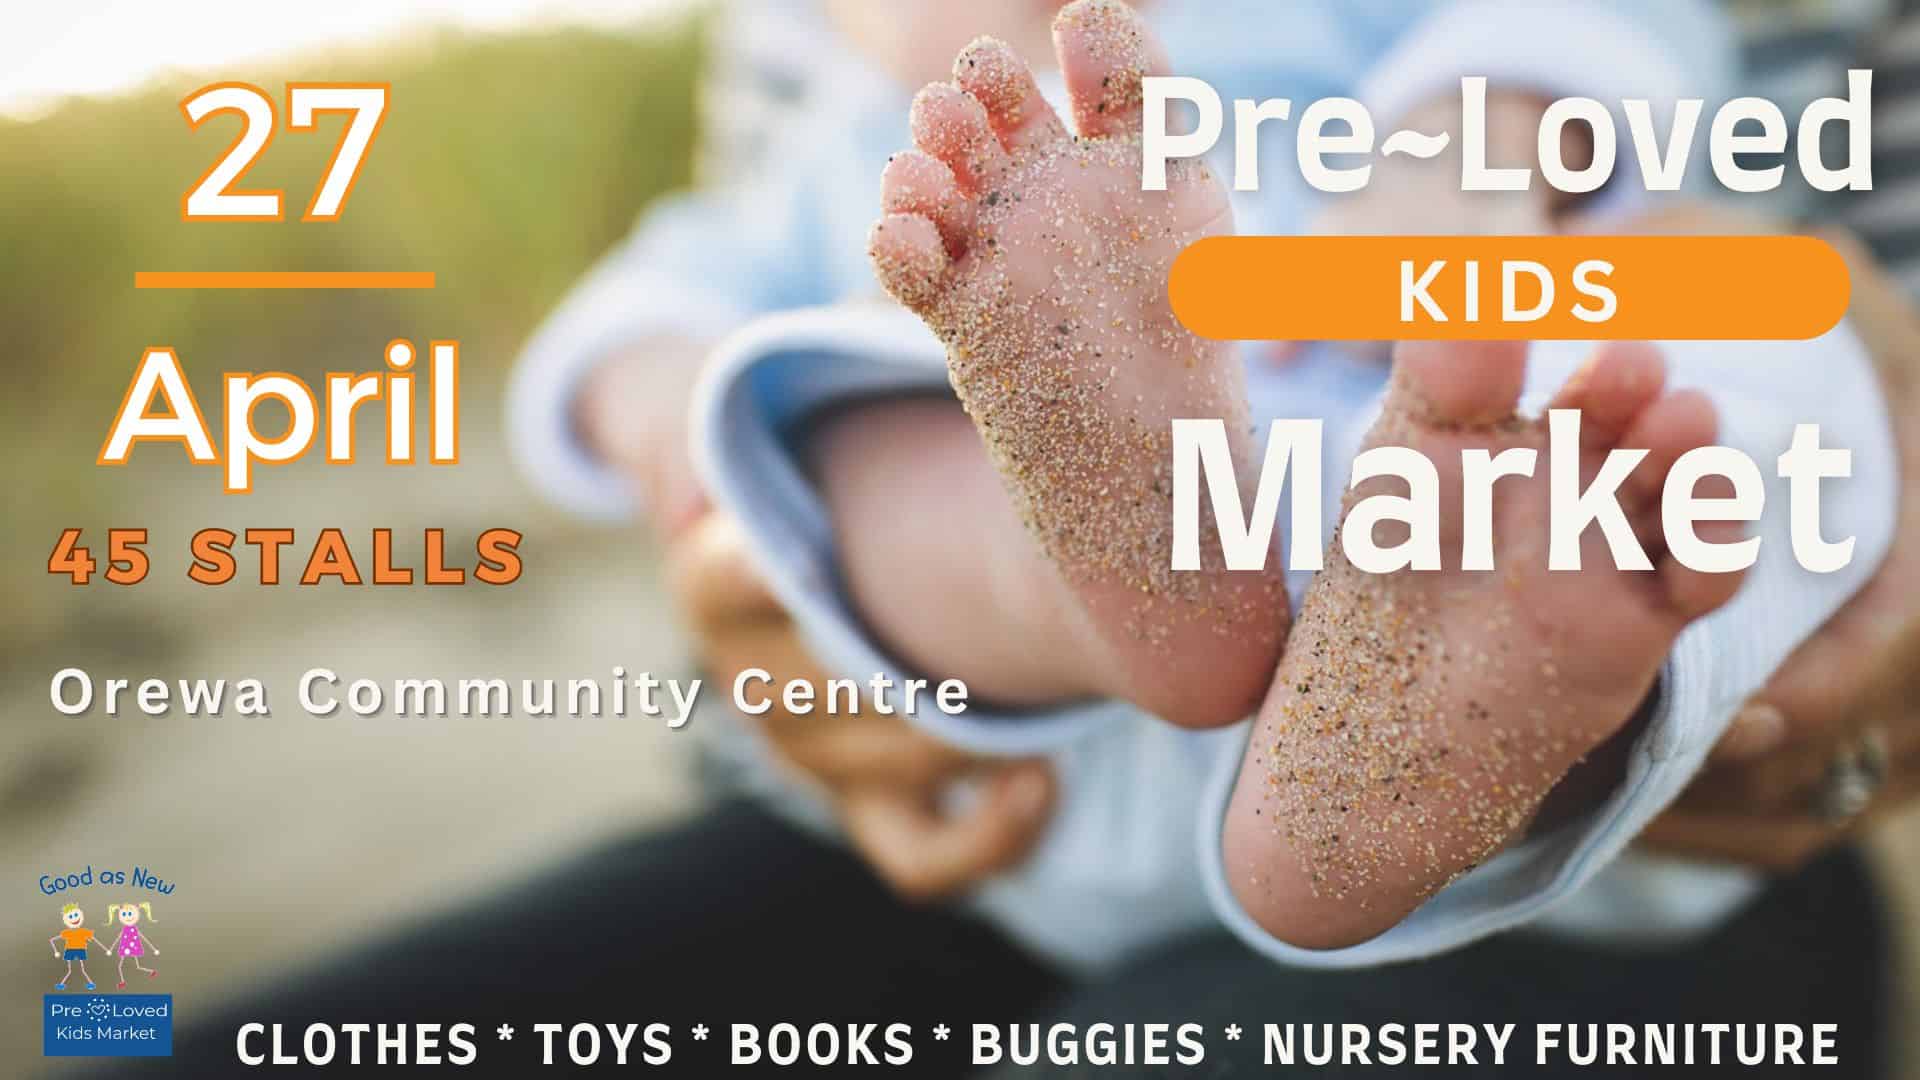 April kids market event with baby's sandy feet.